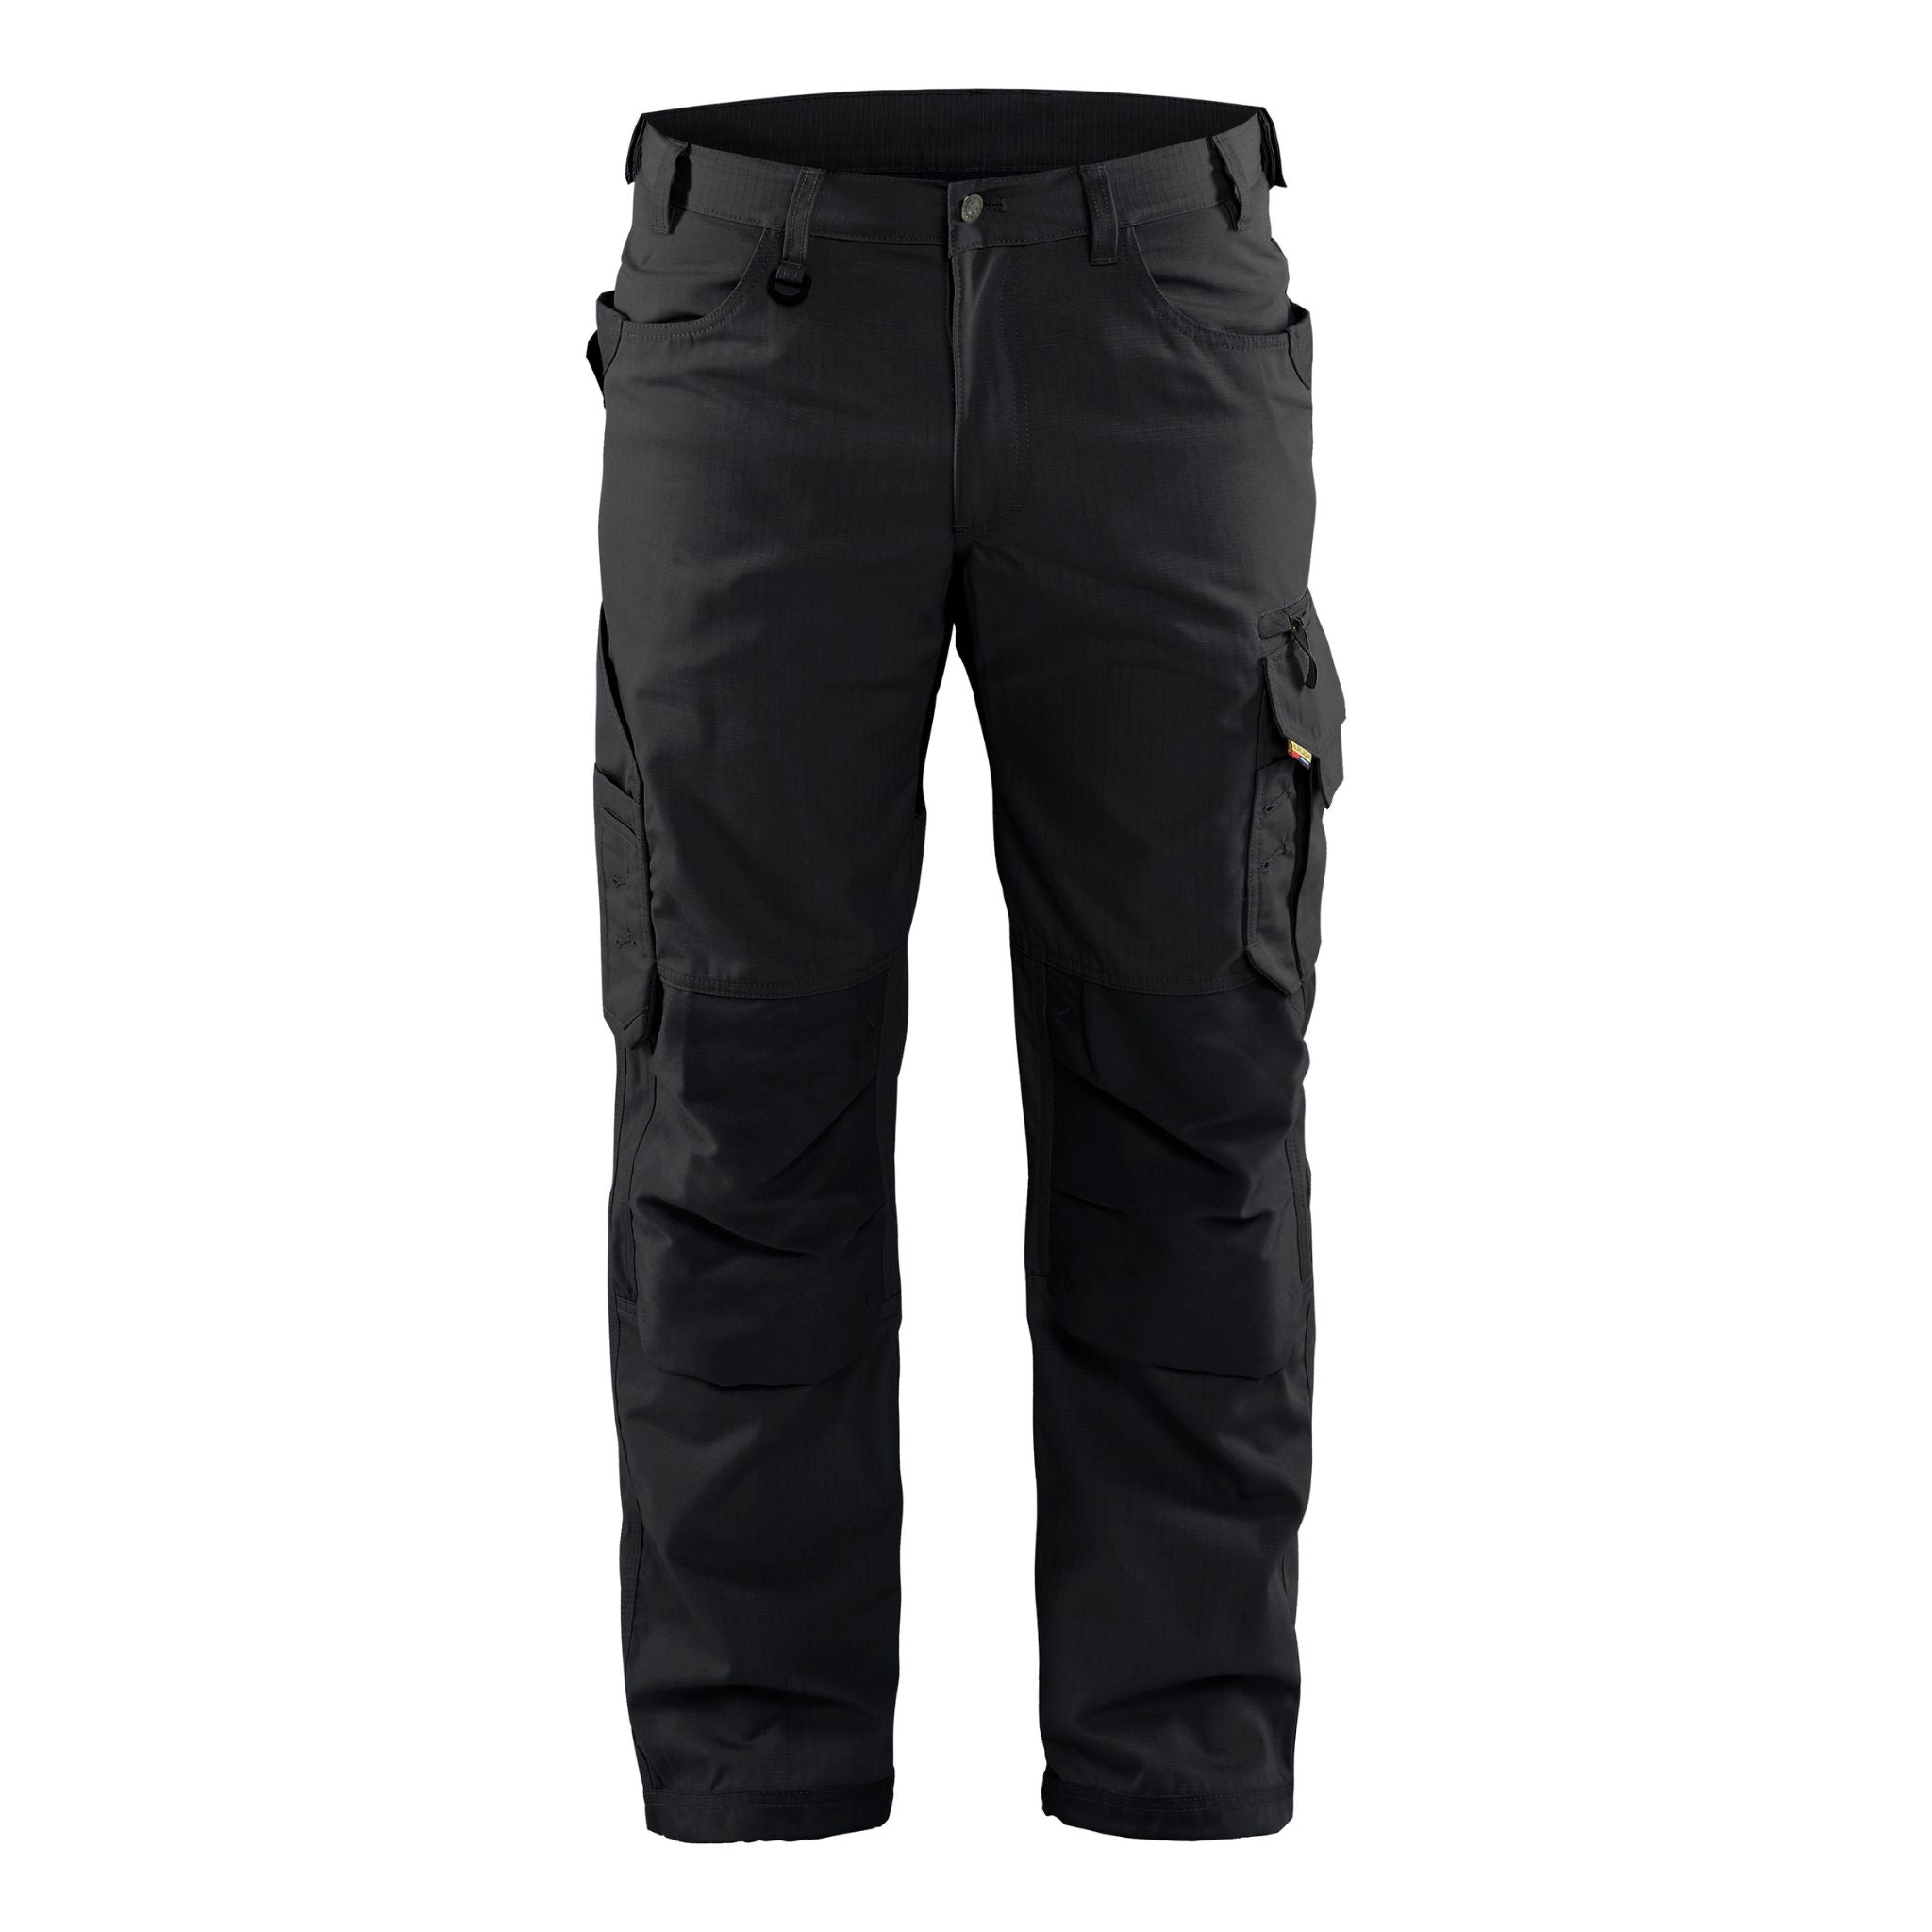 Men's show black ripstop pants with eleven pockets